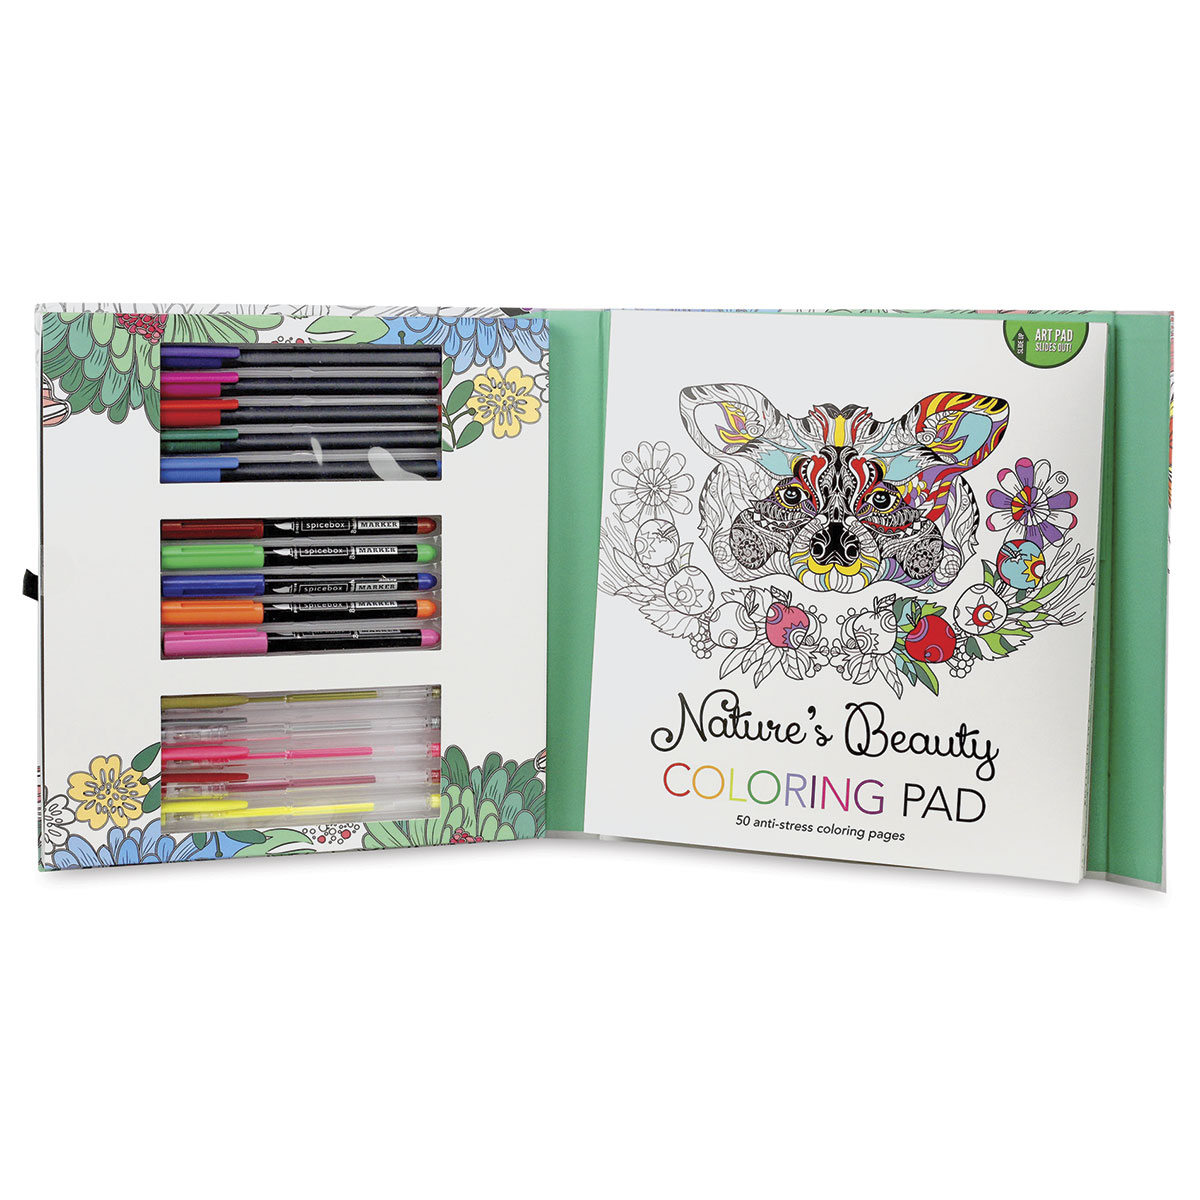 Spicebox Sketch Plus Nature's Beauty Coloring Kit